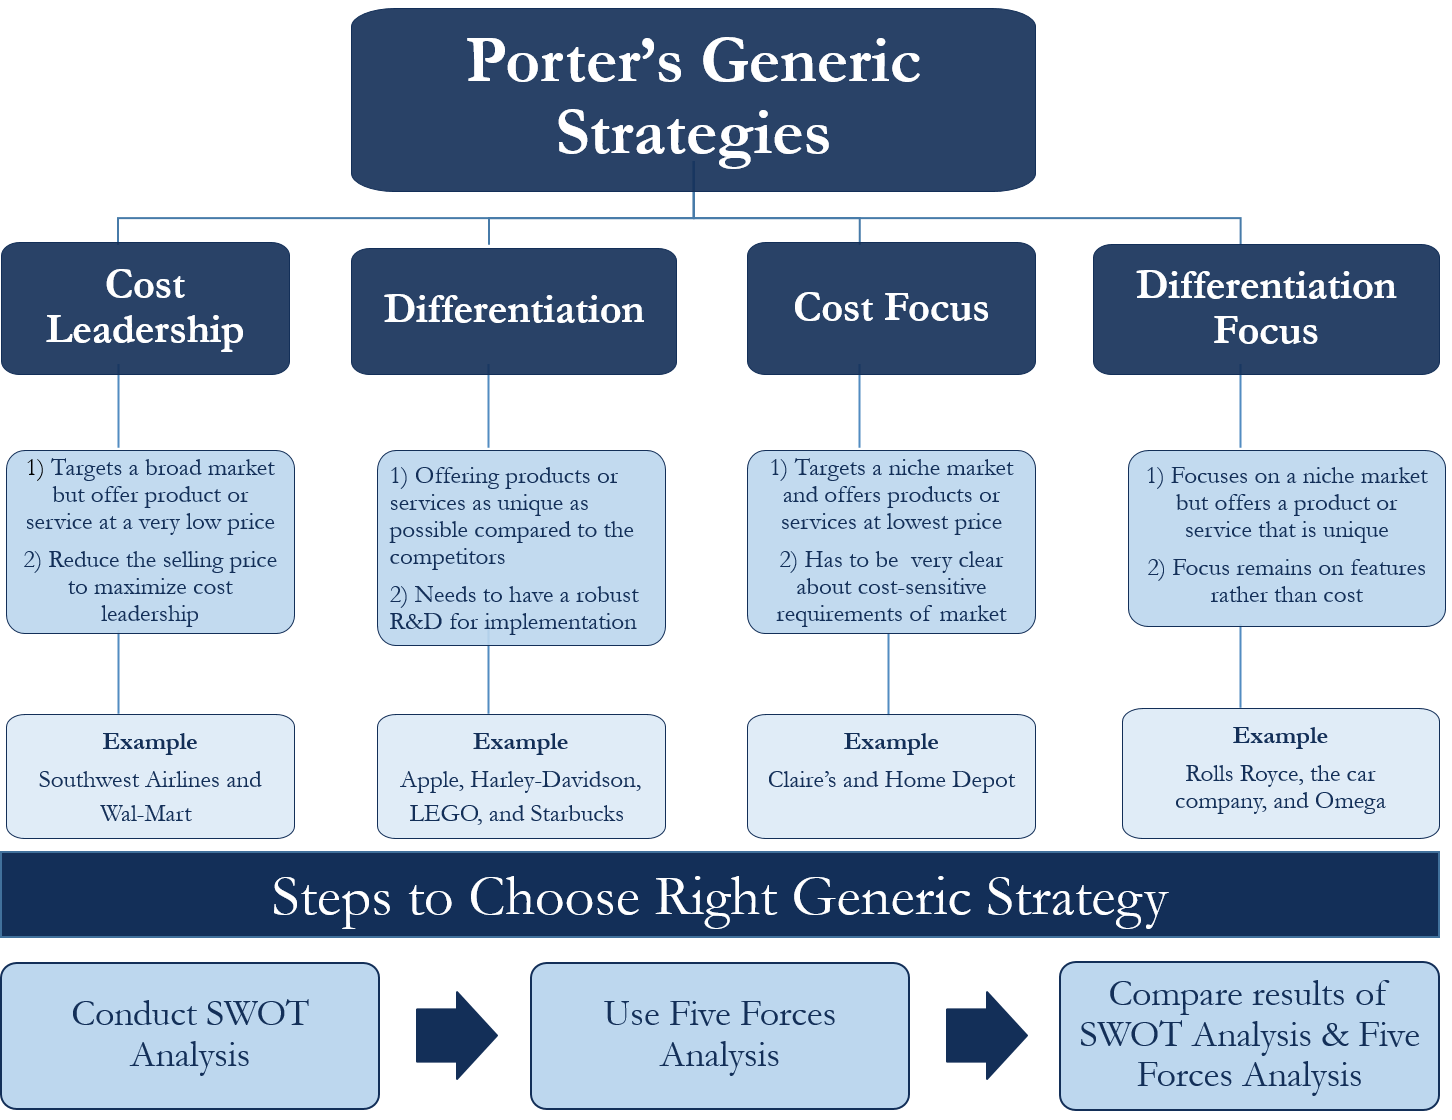 Porters Generic Strategies  Meaning, Types, and Example